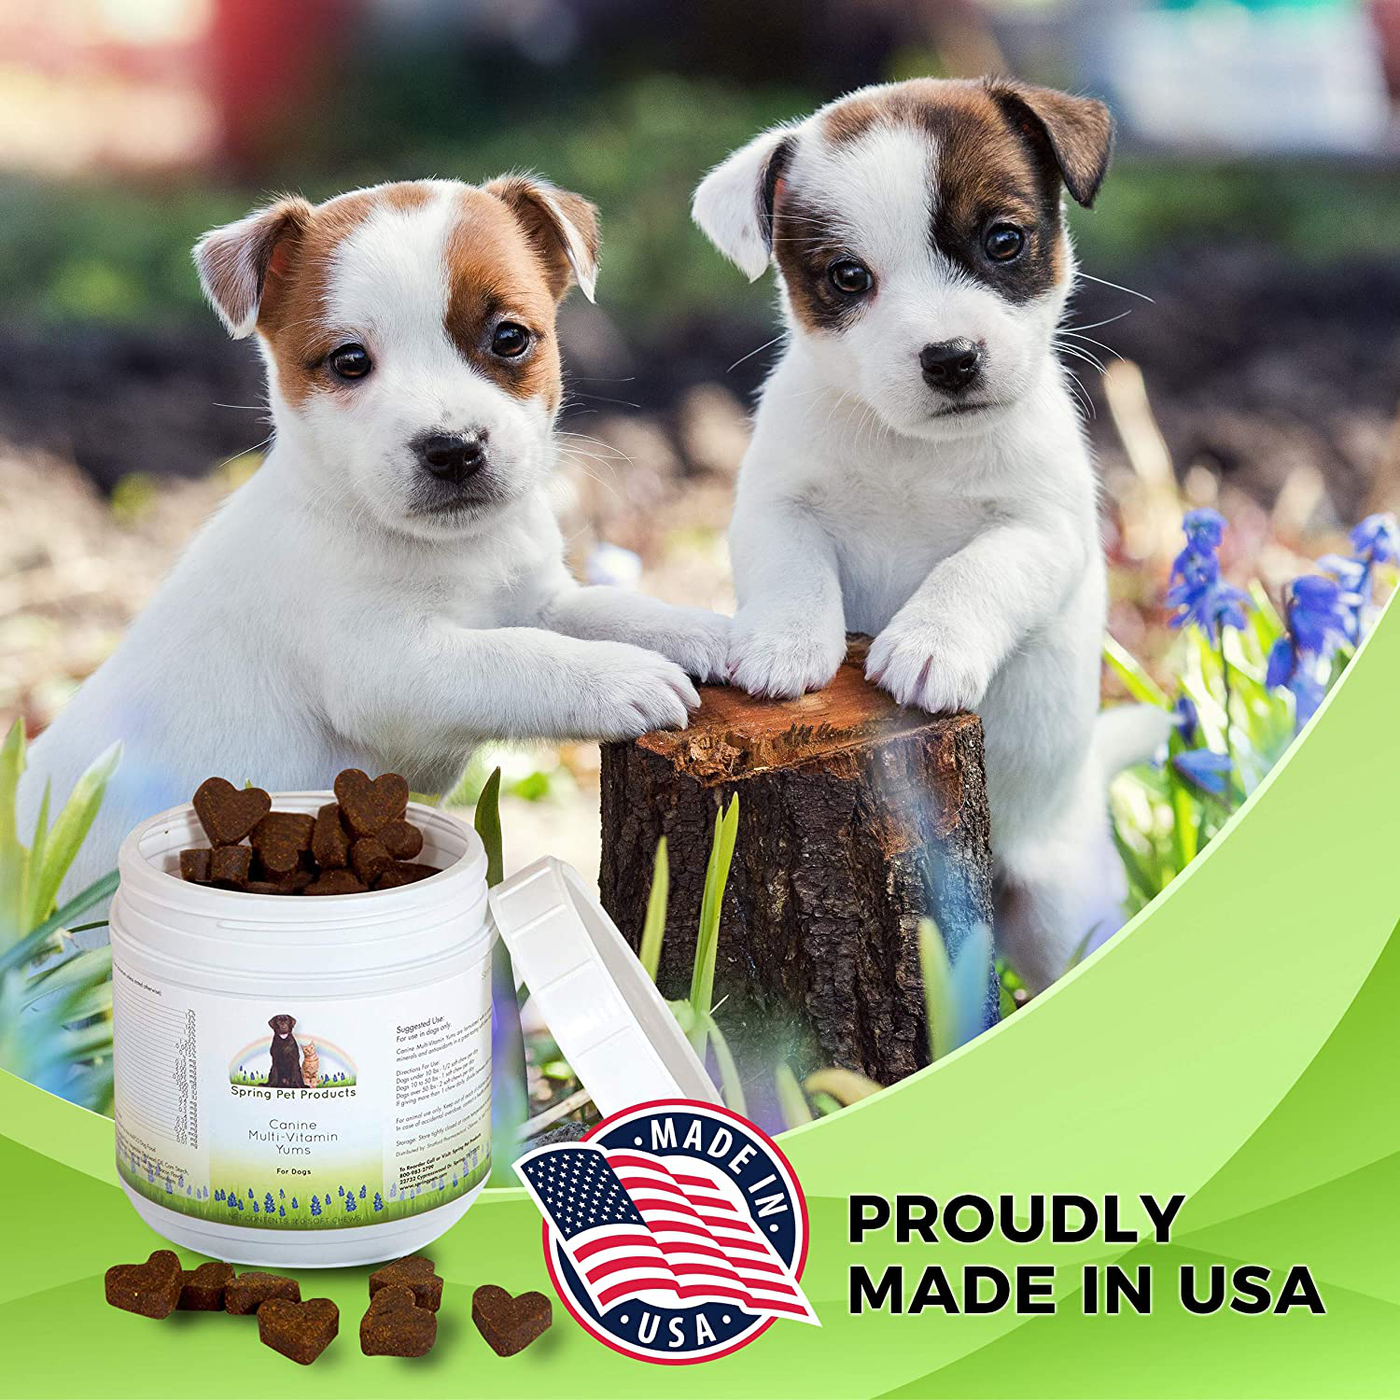 Spring Pet Canine Multi-Vitamin YUMS ~ Formulated with a Comprehensive Blend of Complete Vitamins and Minerals ~ for Use in Dogs Puppies Only ~ Made in USA ~ Recommended by Veterinarians